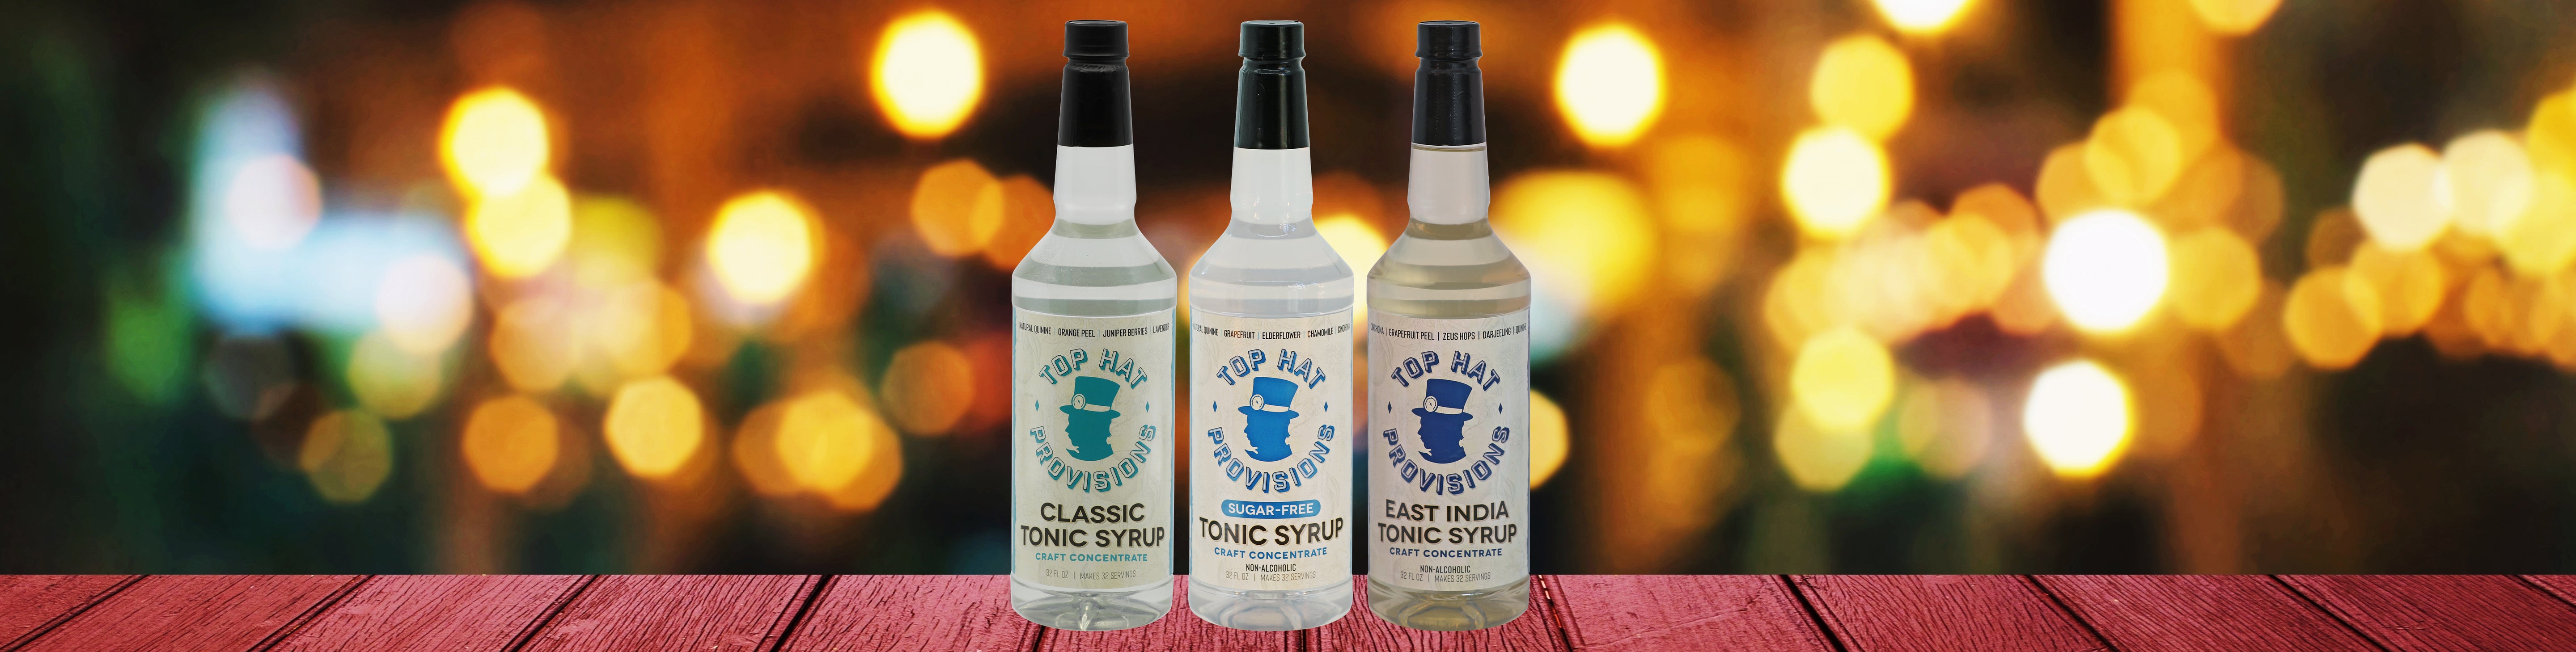 TONIC SYRUPS & QUININE CONCENTRATES